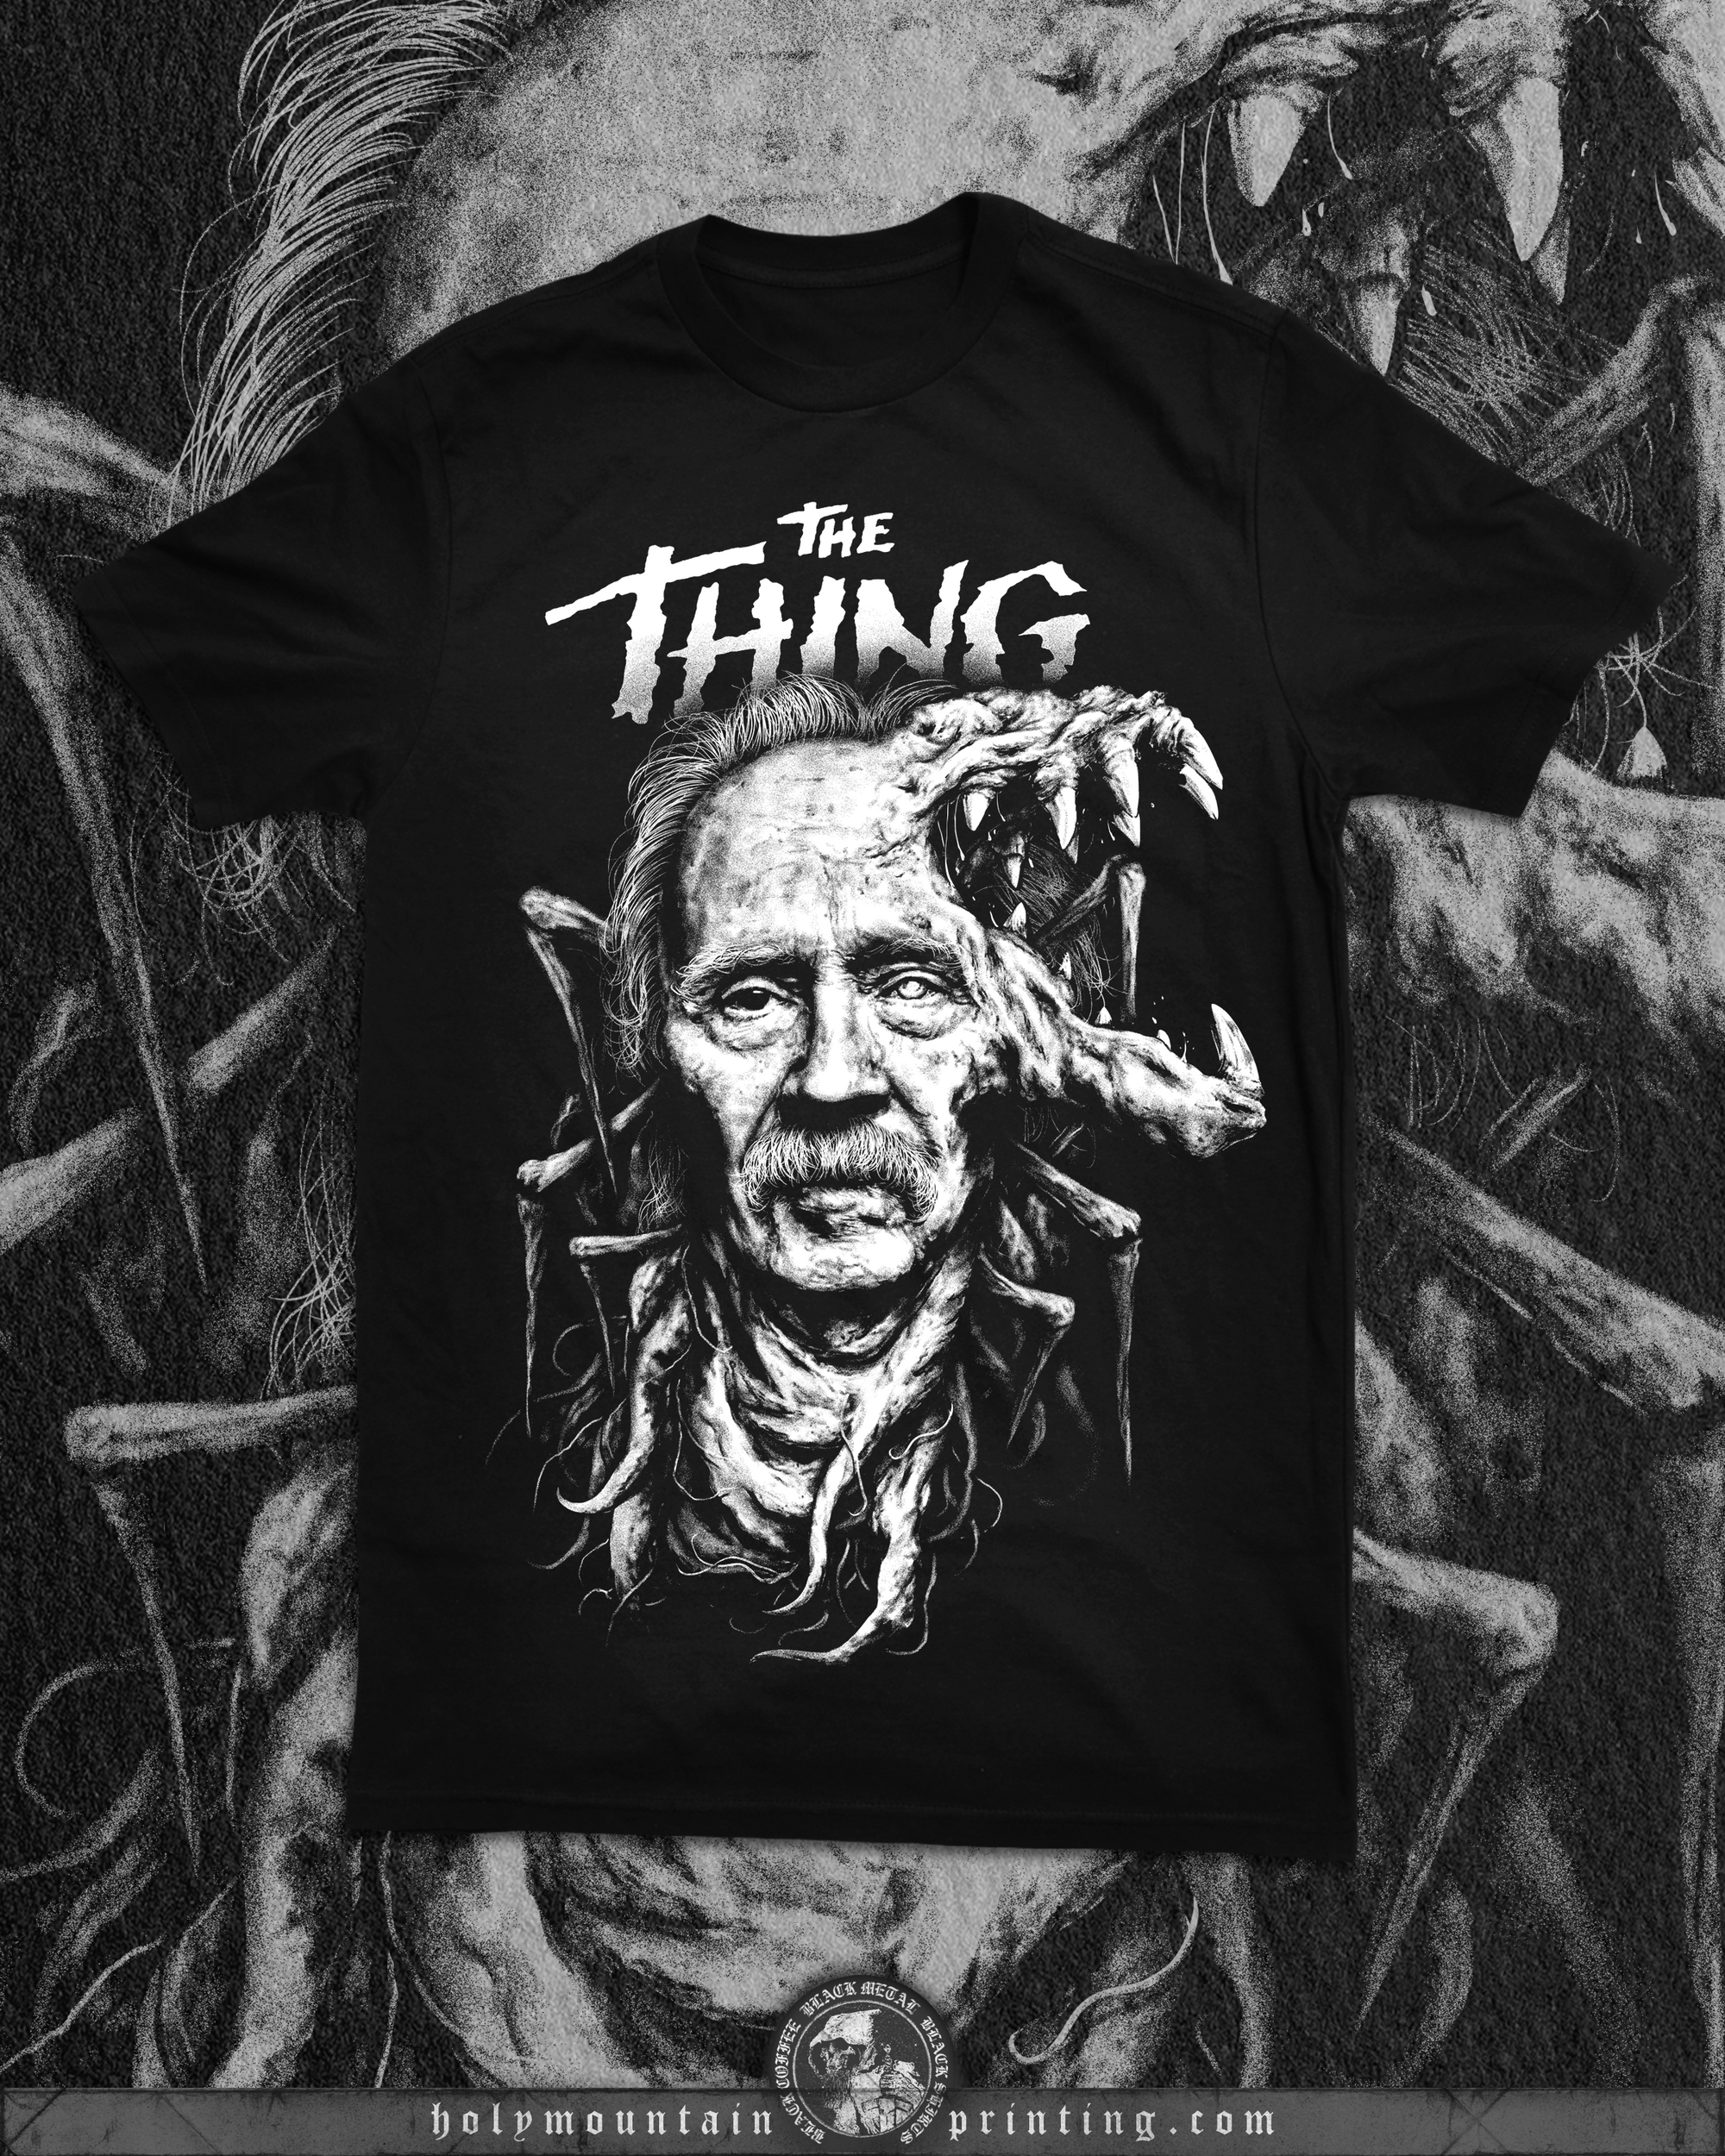 ABACROMBIE INK "THE THING" SHIRT (PRE-ORDER)